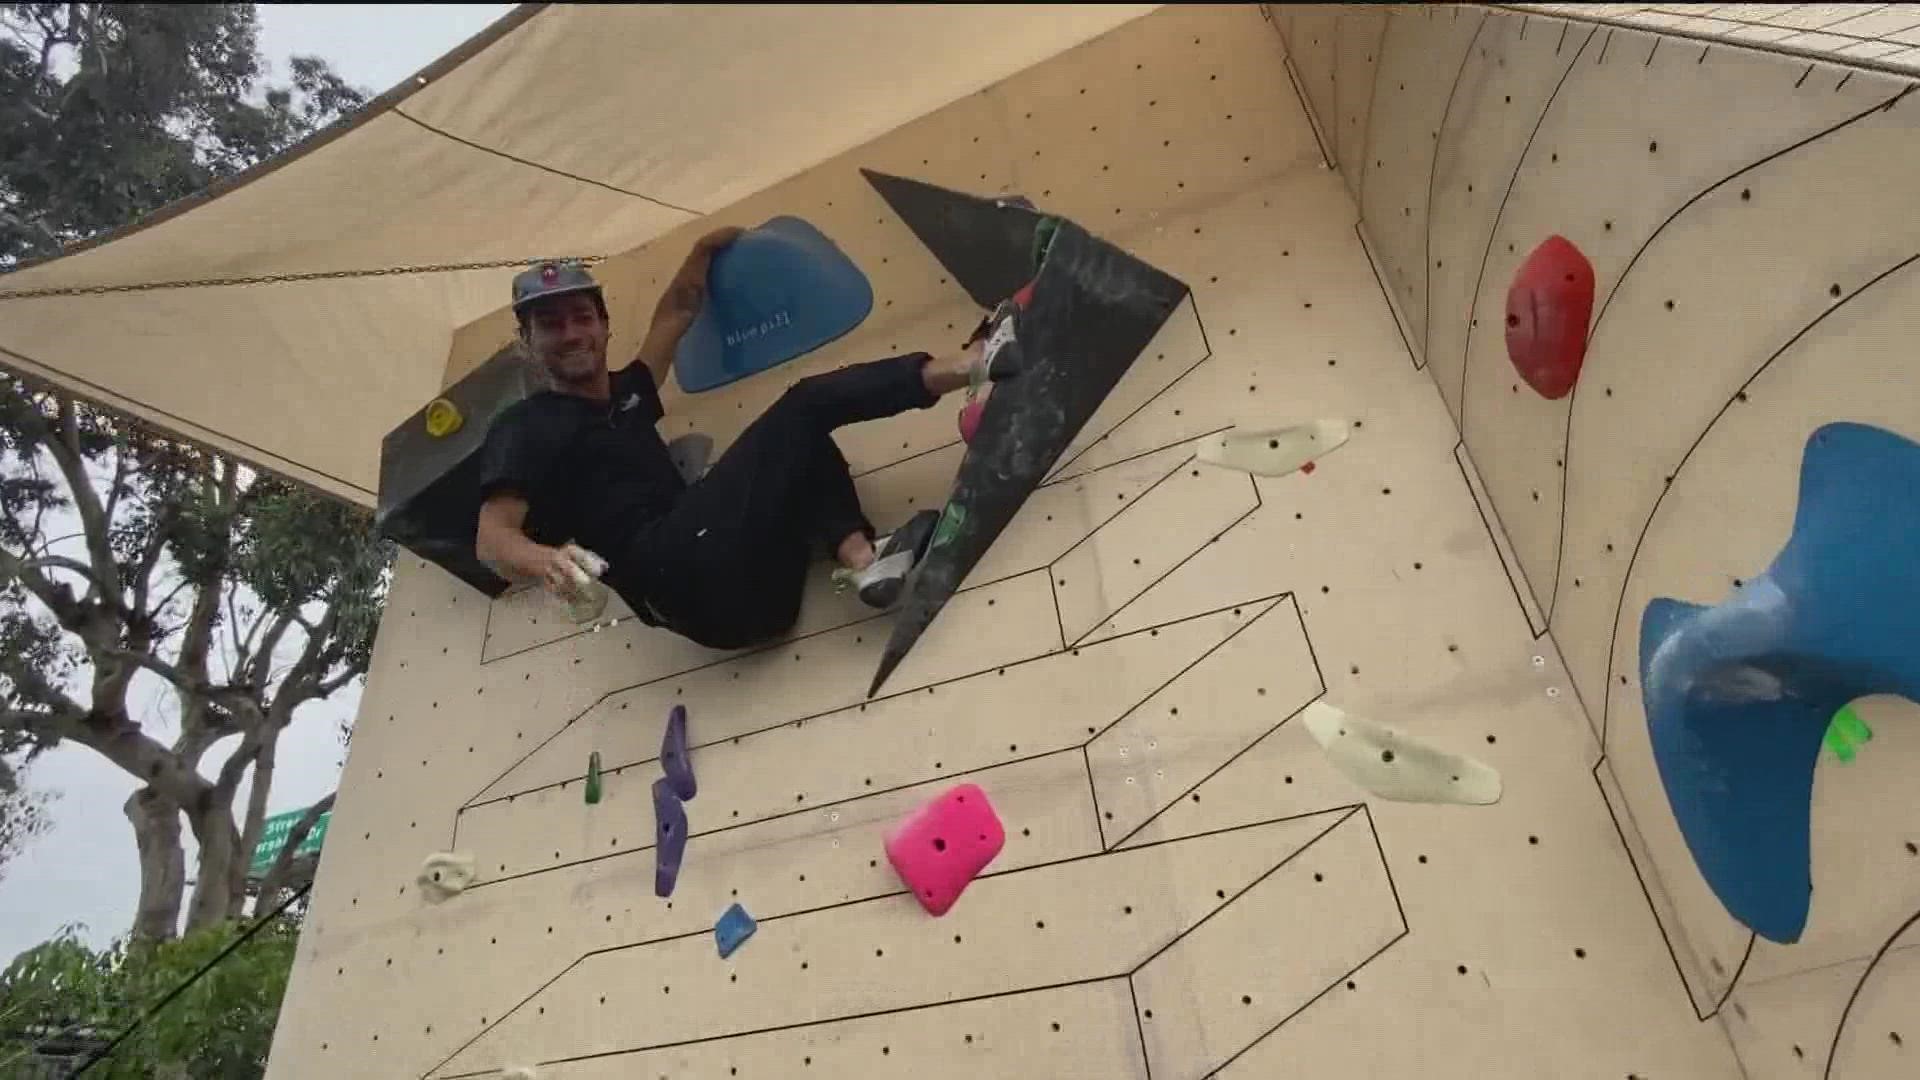 Jordan Romig opened Asylum Outdoor Bouldering to honor his grandfather who suffered from depression.